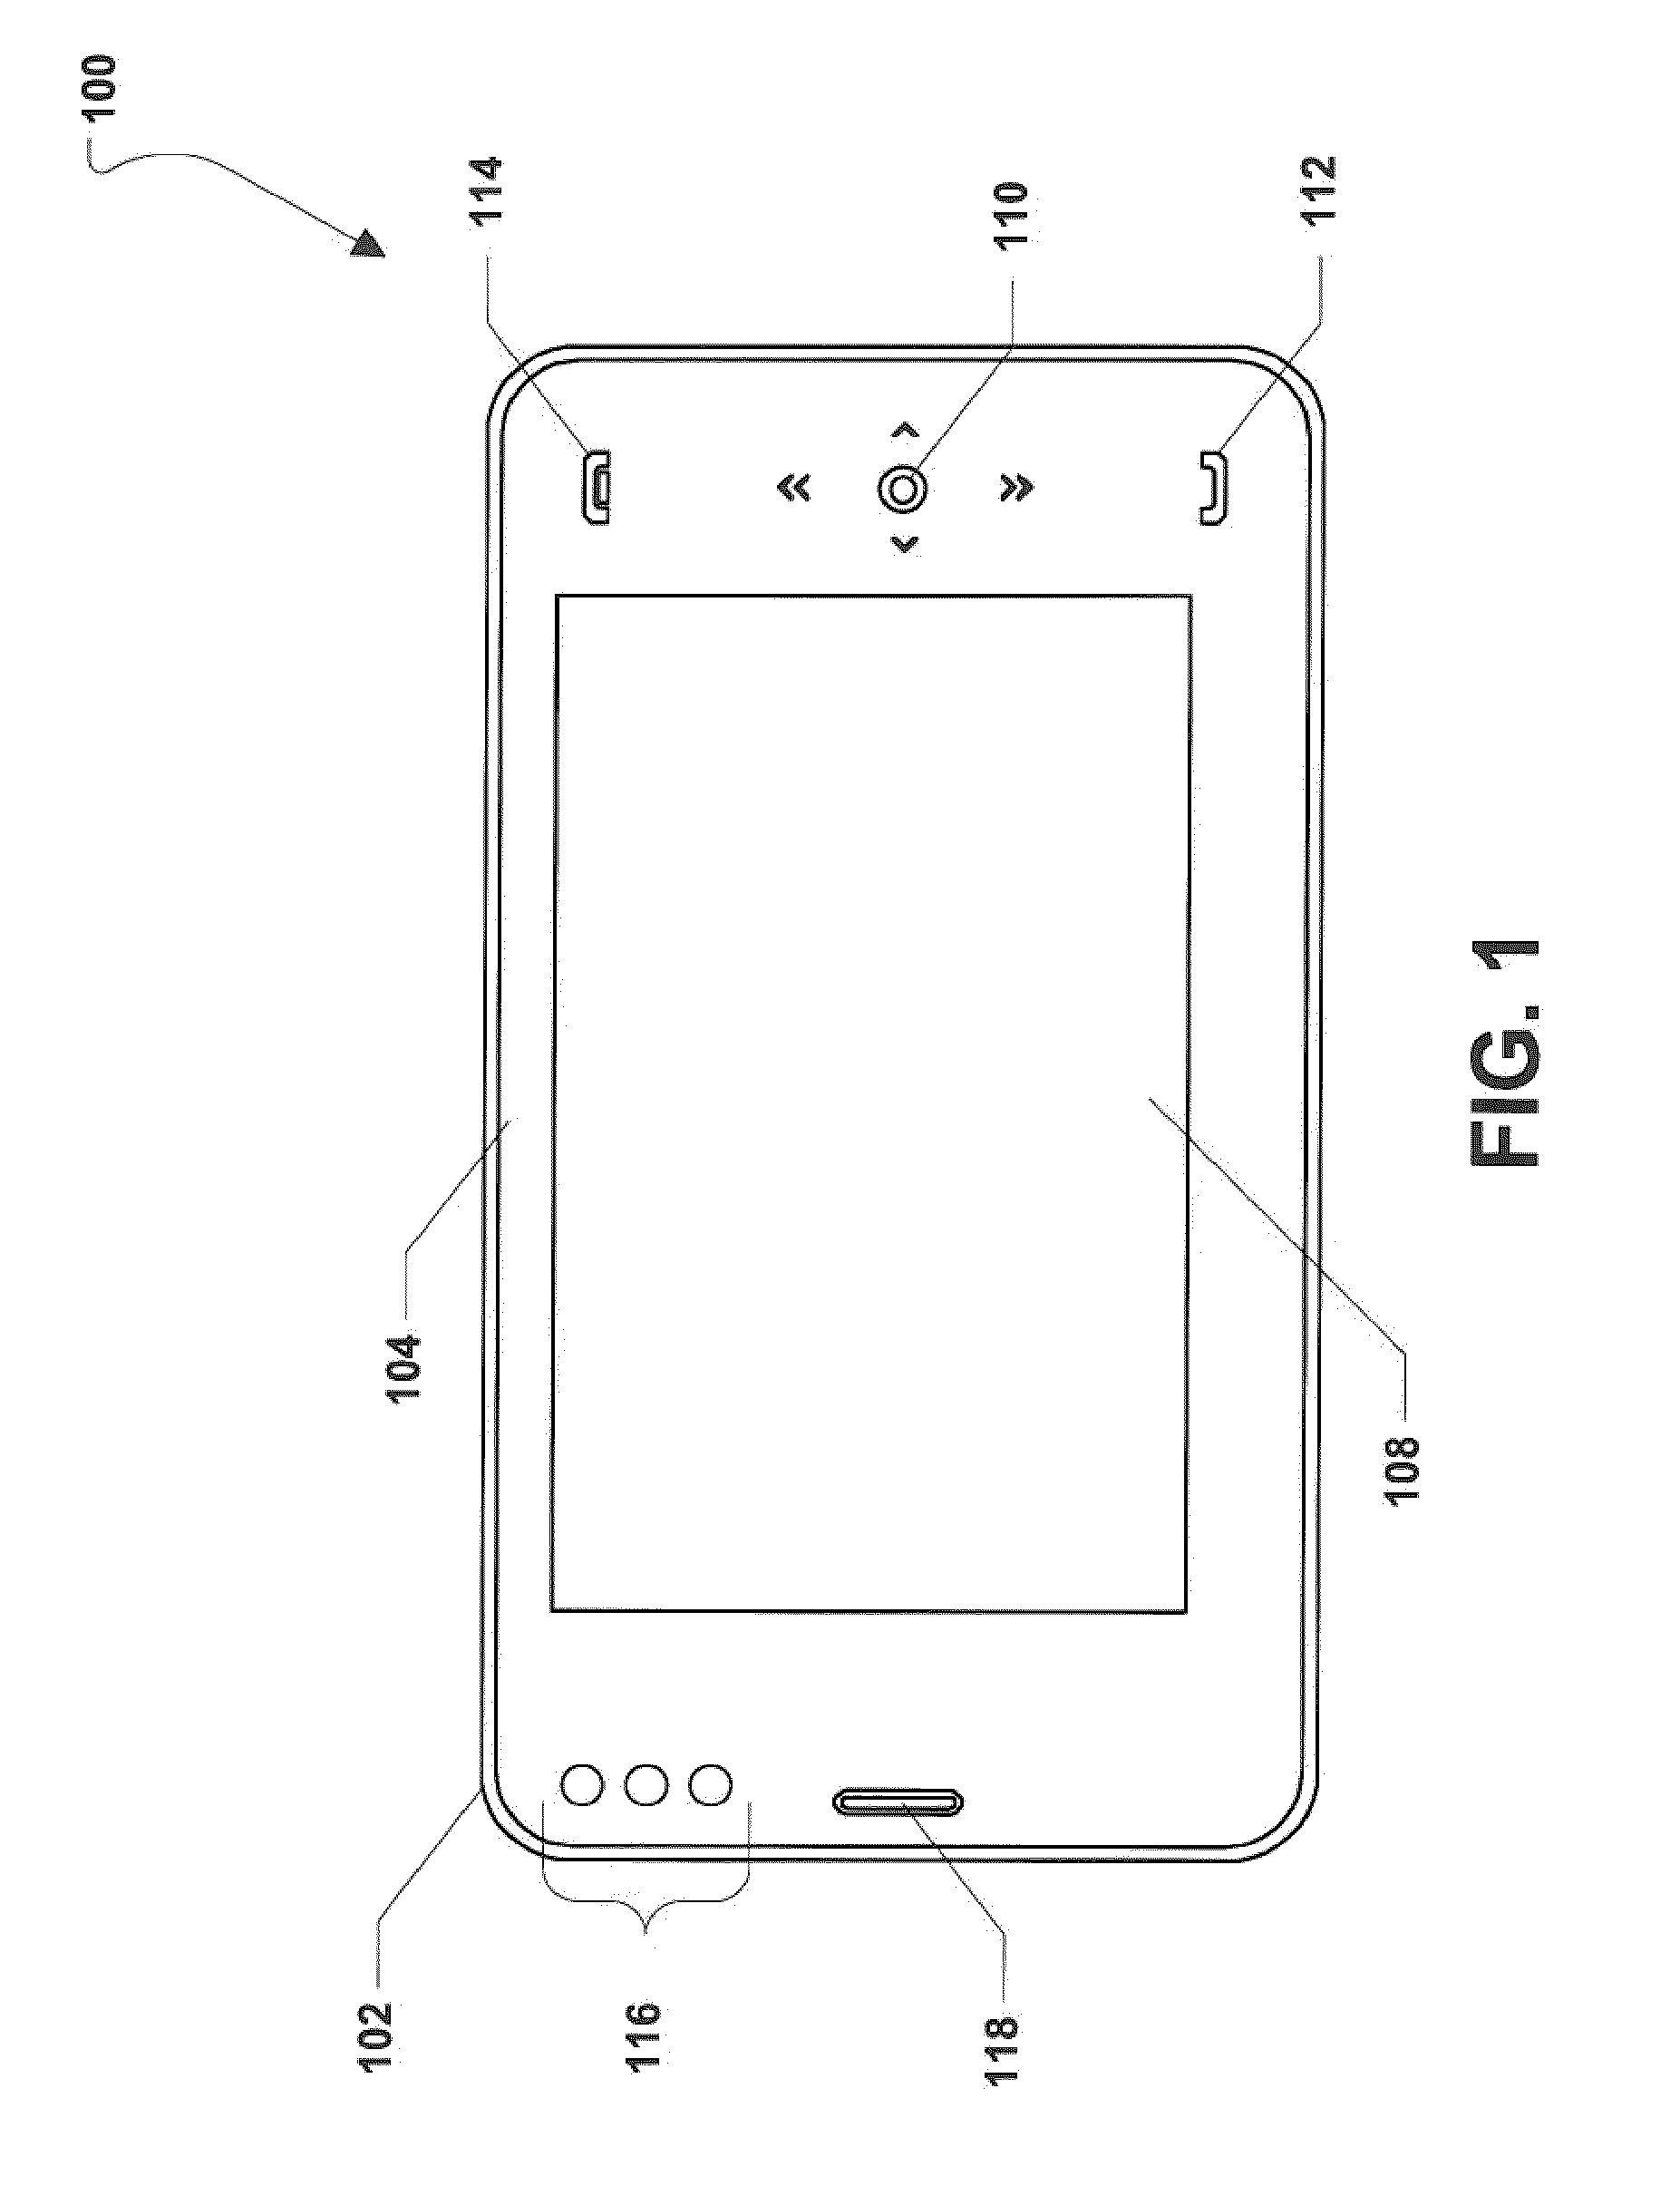 Keyboard for a portable computing device